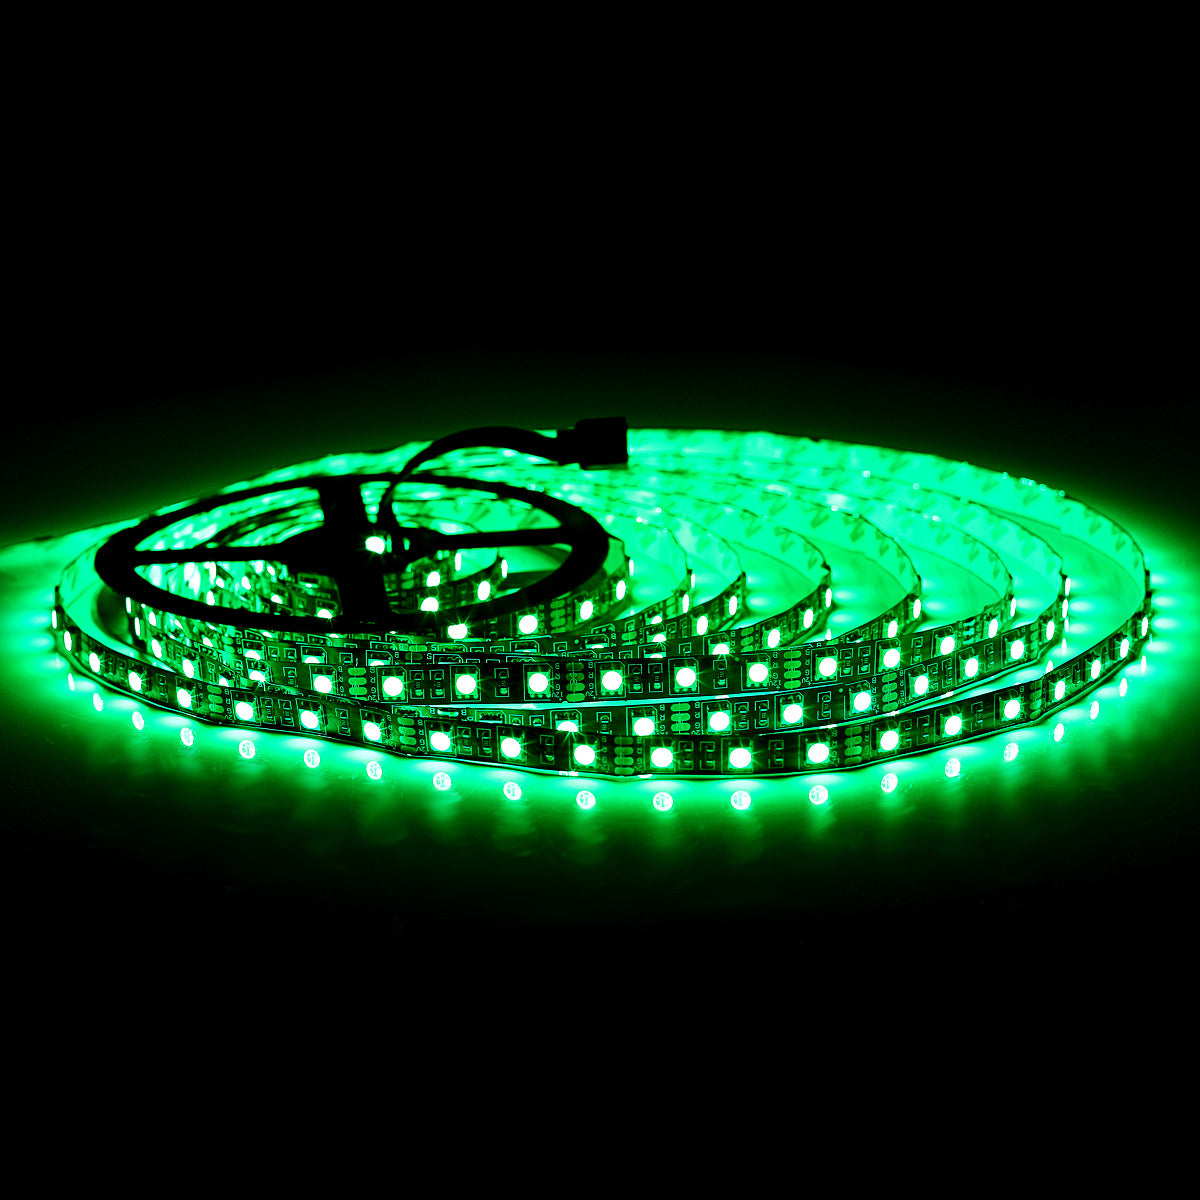 SUPERNIGHT 16.4Ft RGB 5050 SMD 300LEDs Strip Lights Non-waterproof, with Black PCB ( Single Light Strip Only )